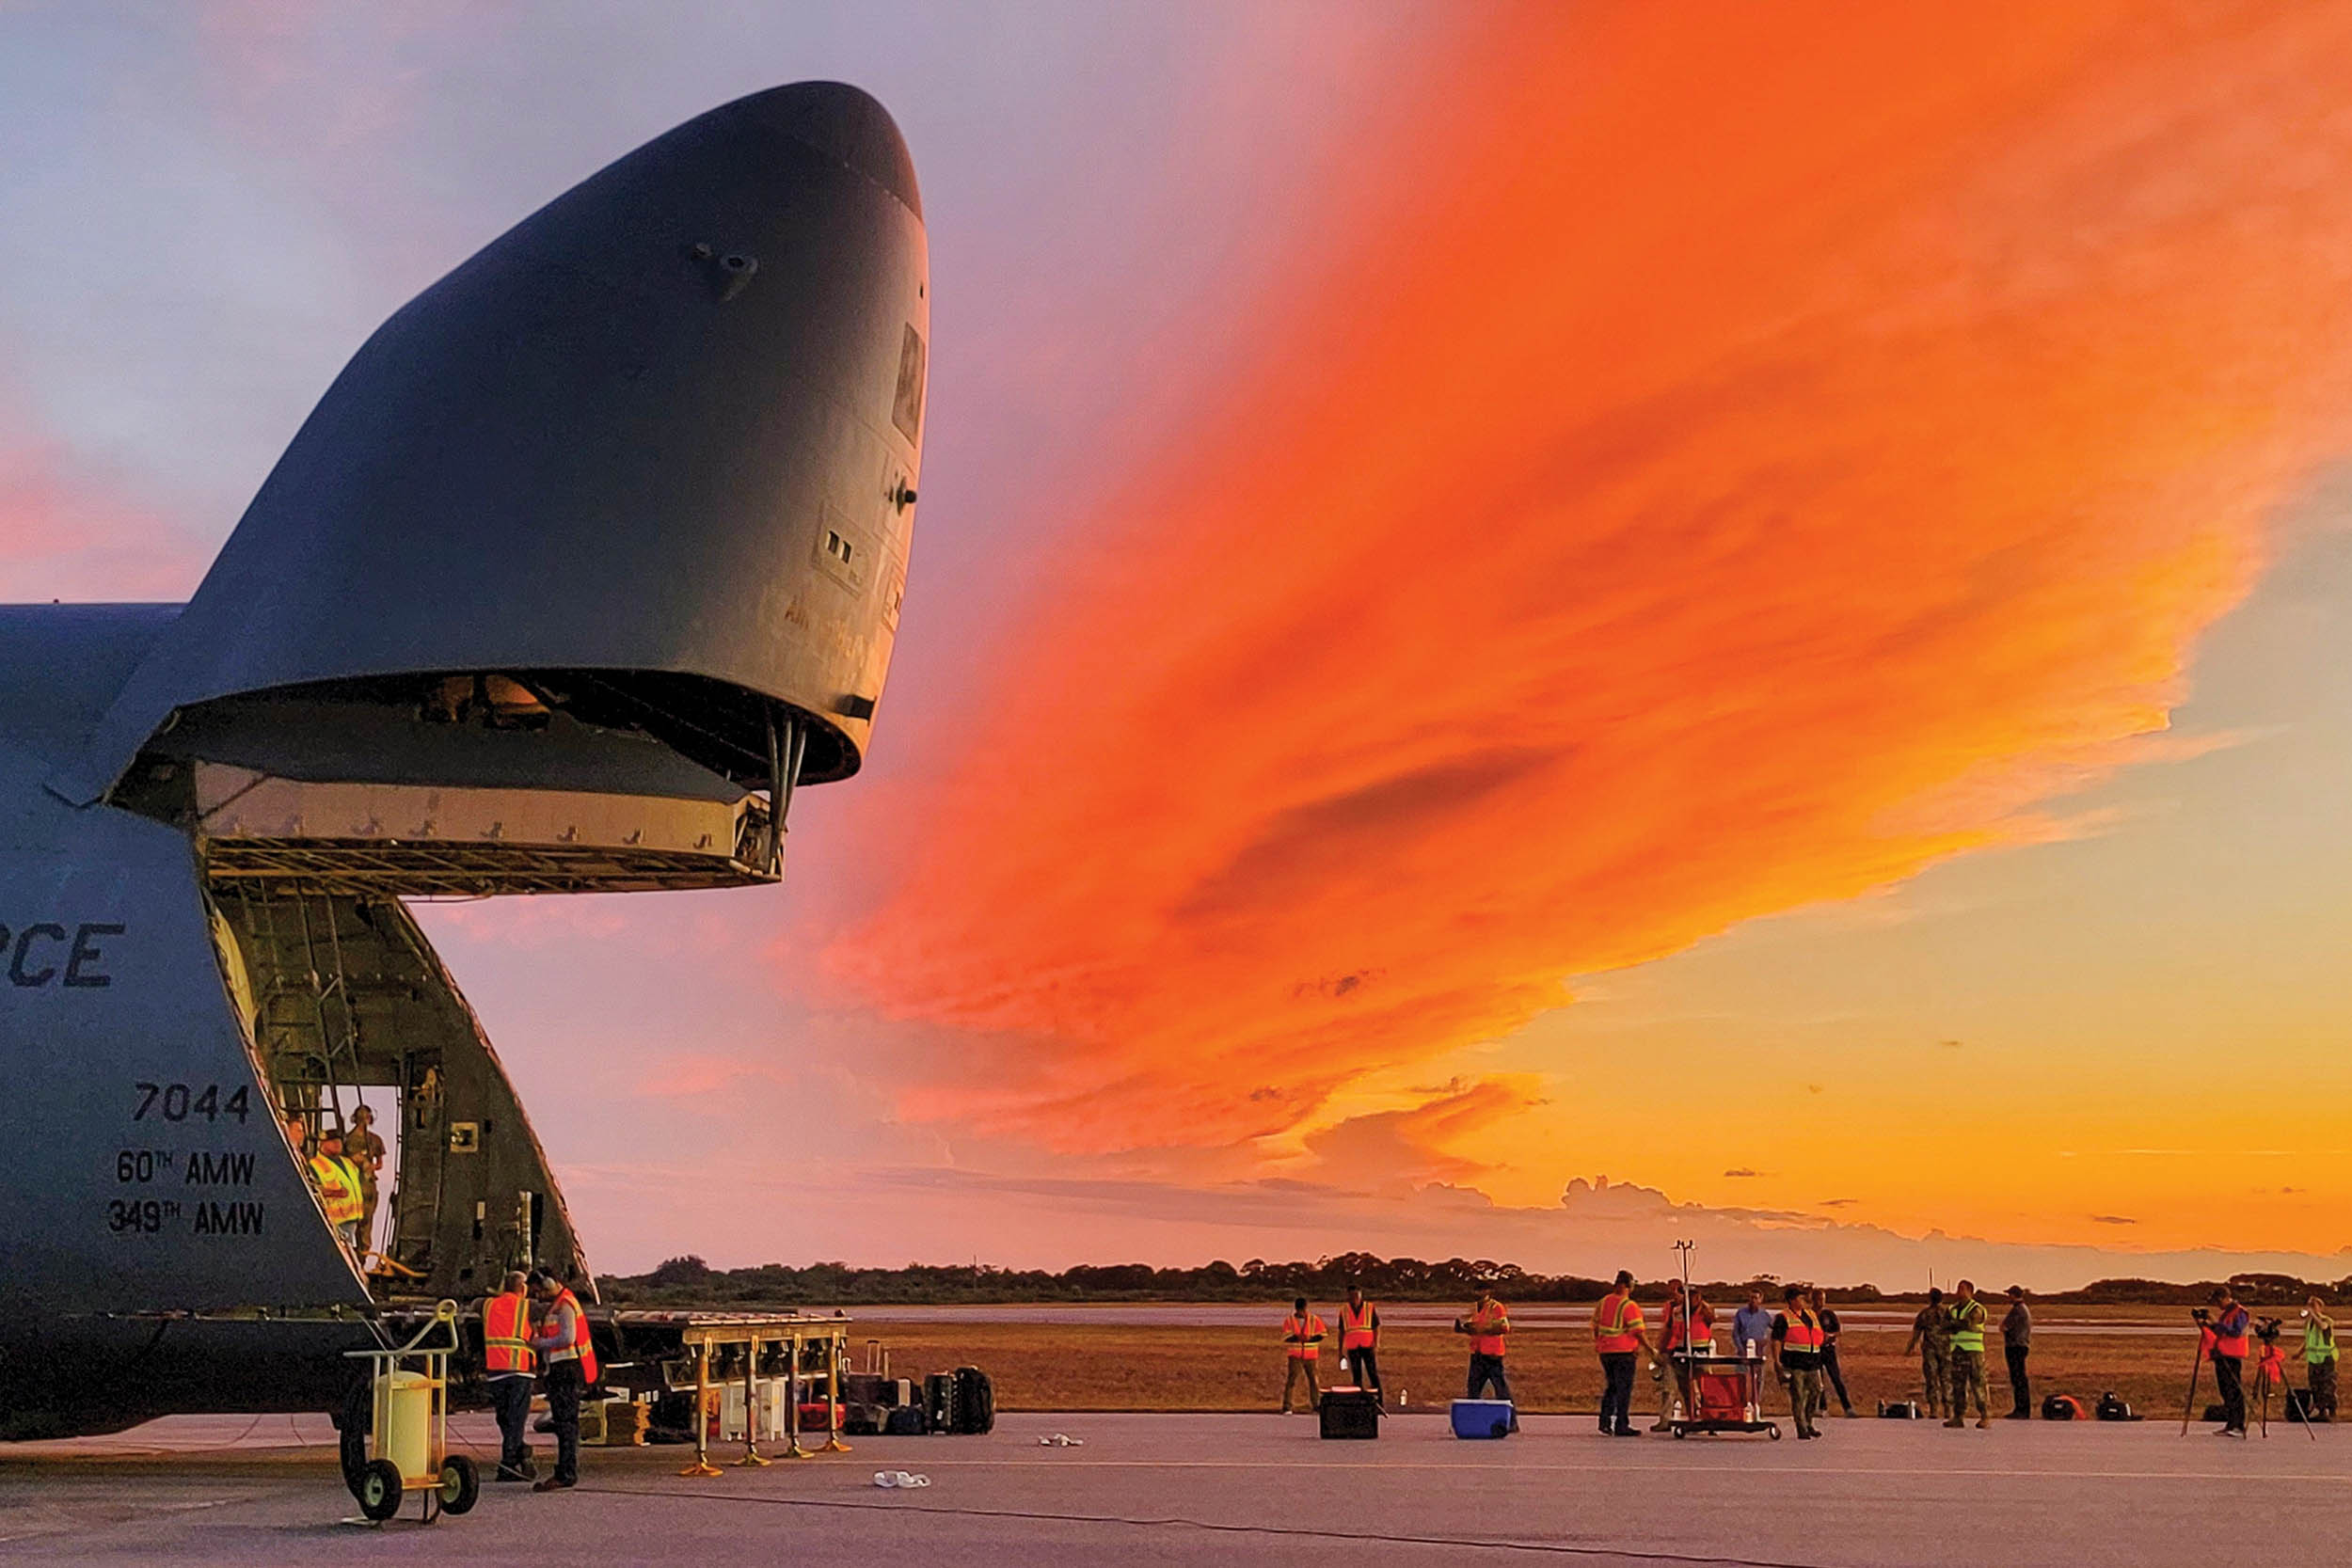 Loadmasters from 60th Air Mobility Wing and Lockheed Martin Space unload sixth Geosynchronous Earth Orbit Space Based Infrared System satellite from C-5M Super Galaxy, at Cape Canaveral Space Force Station, Florida, June 2, 2022 (U.S. Space Force/Walter Talens)